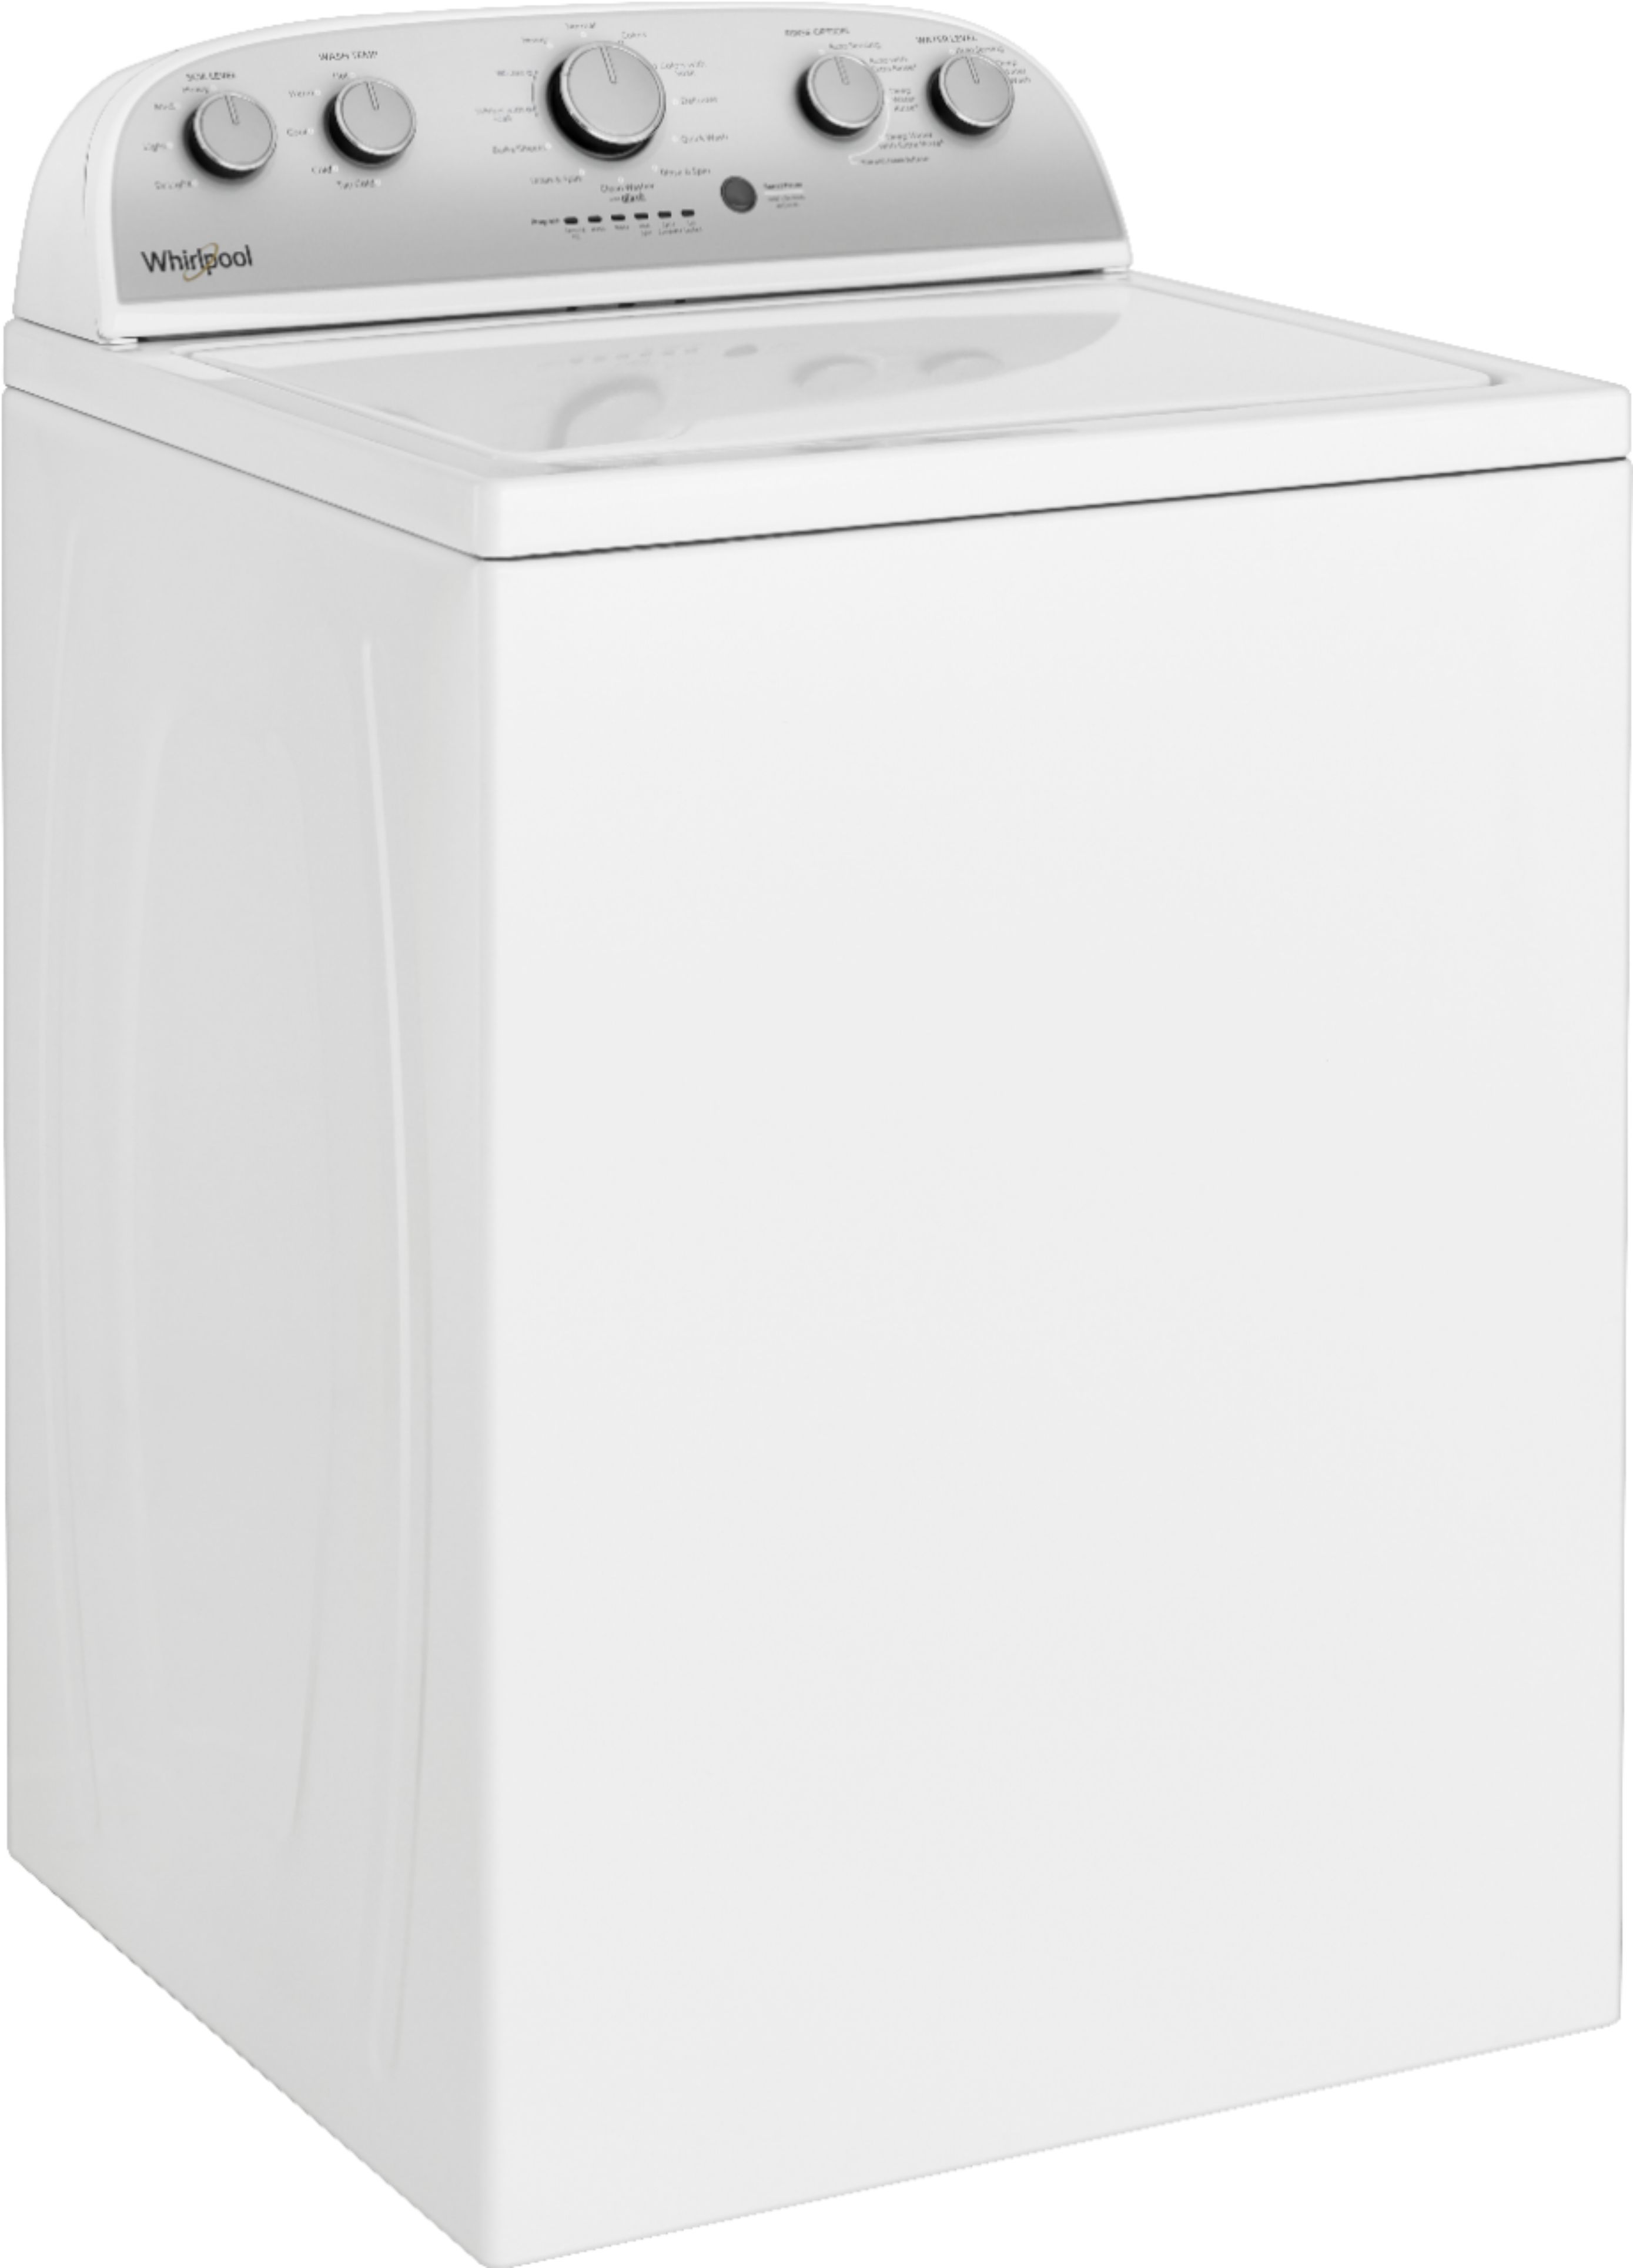 Angle View: Whirlpool - 3.9 Cu. Ft. Top Load Washer with Water Level Selection - White